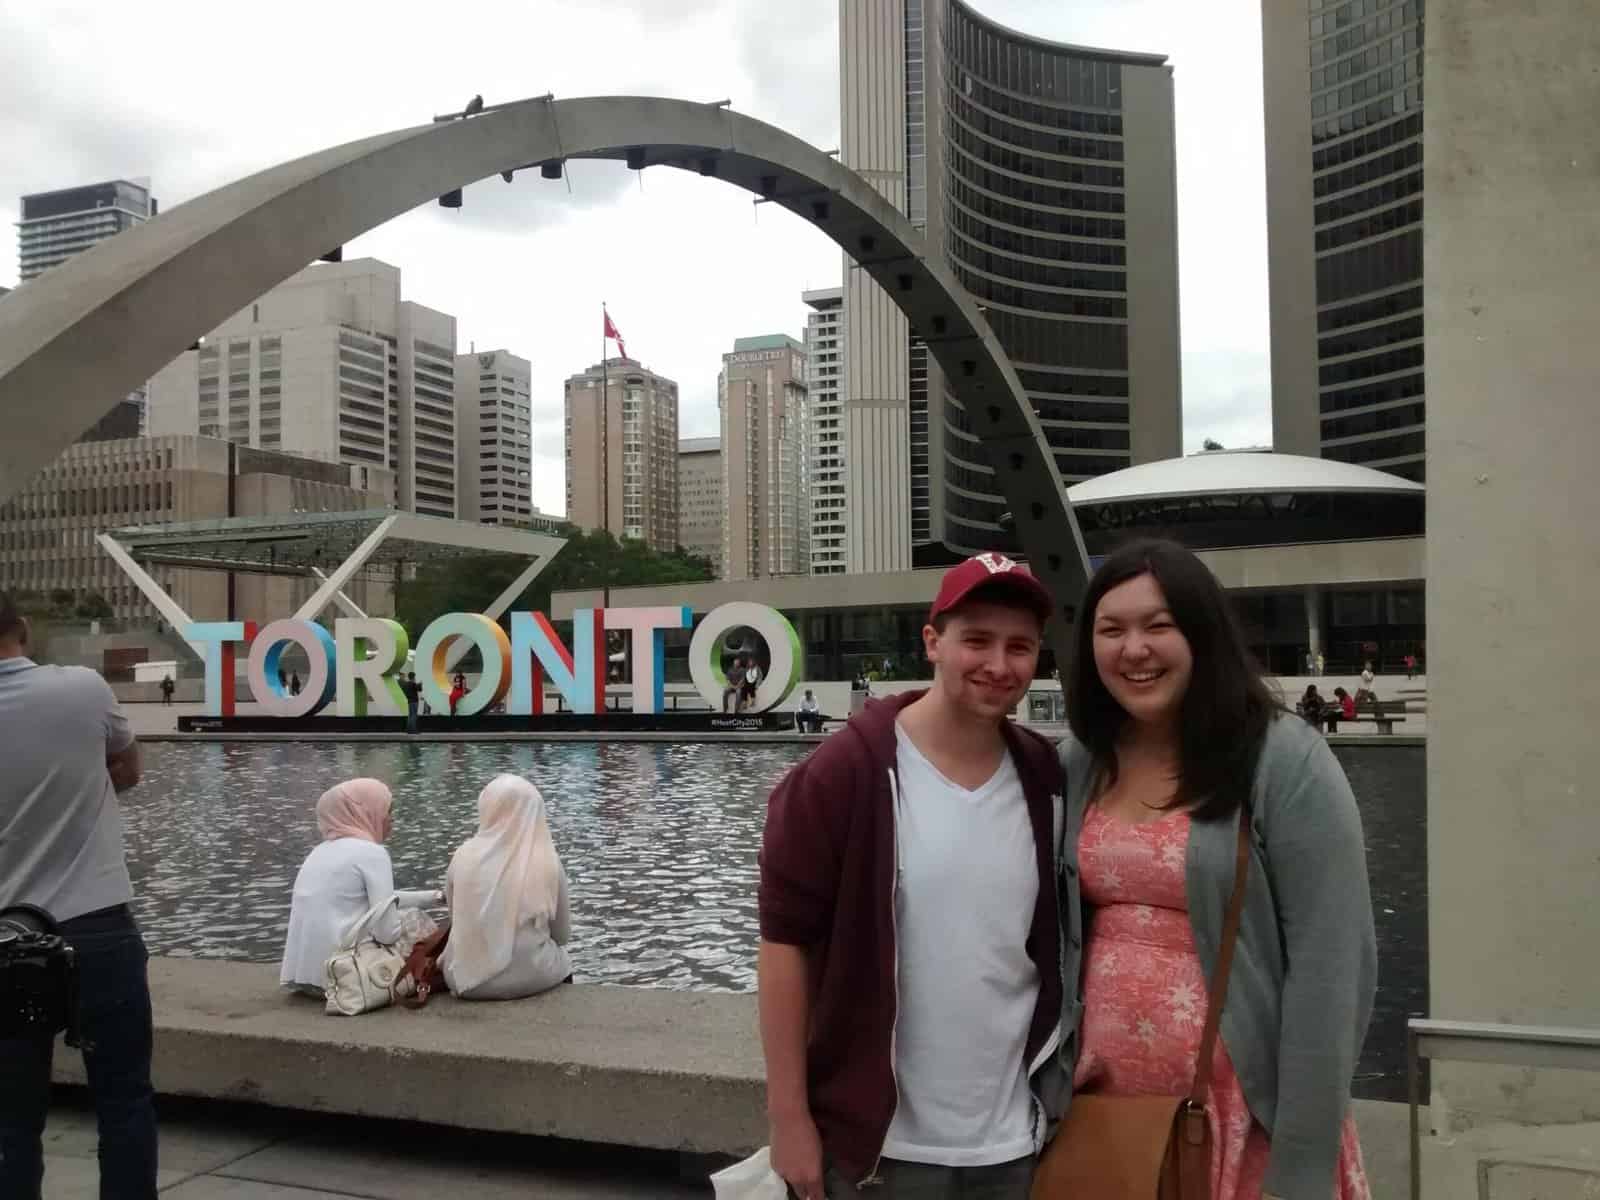 Riana and Colin in front of the Toronto sign at Nathan Phillip Square in 2015